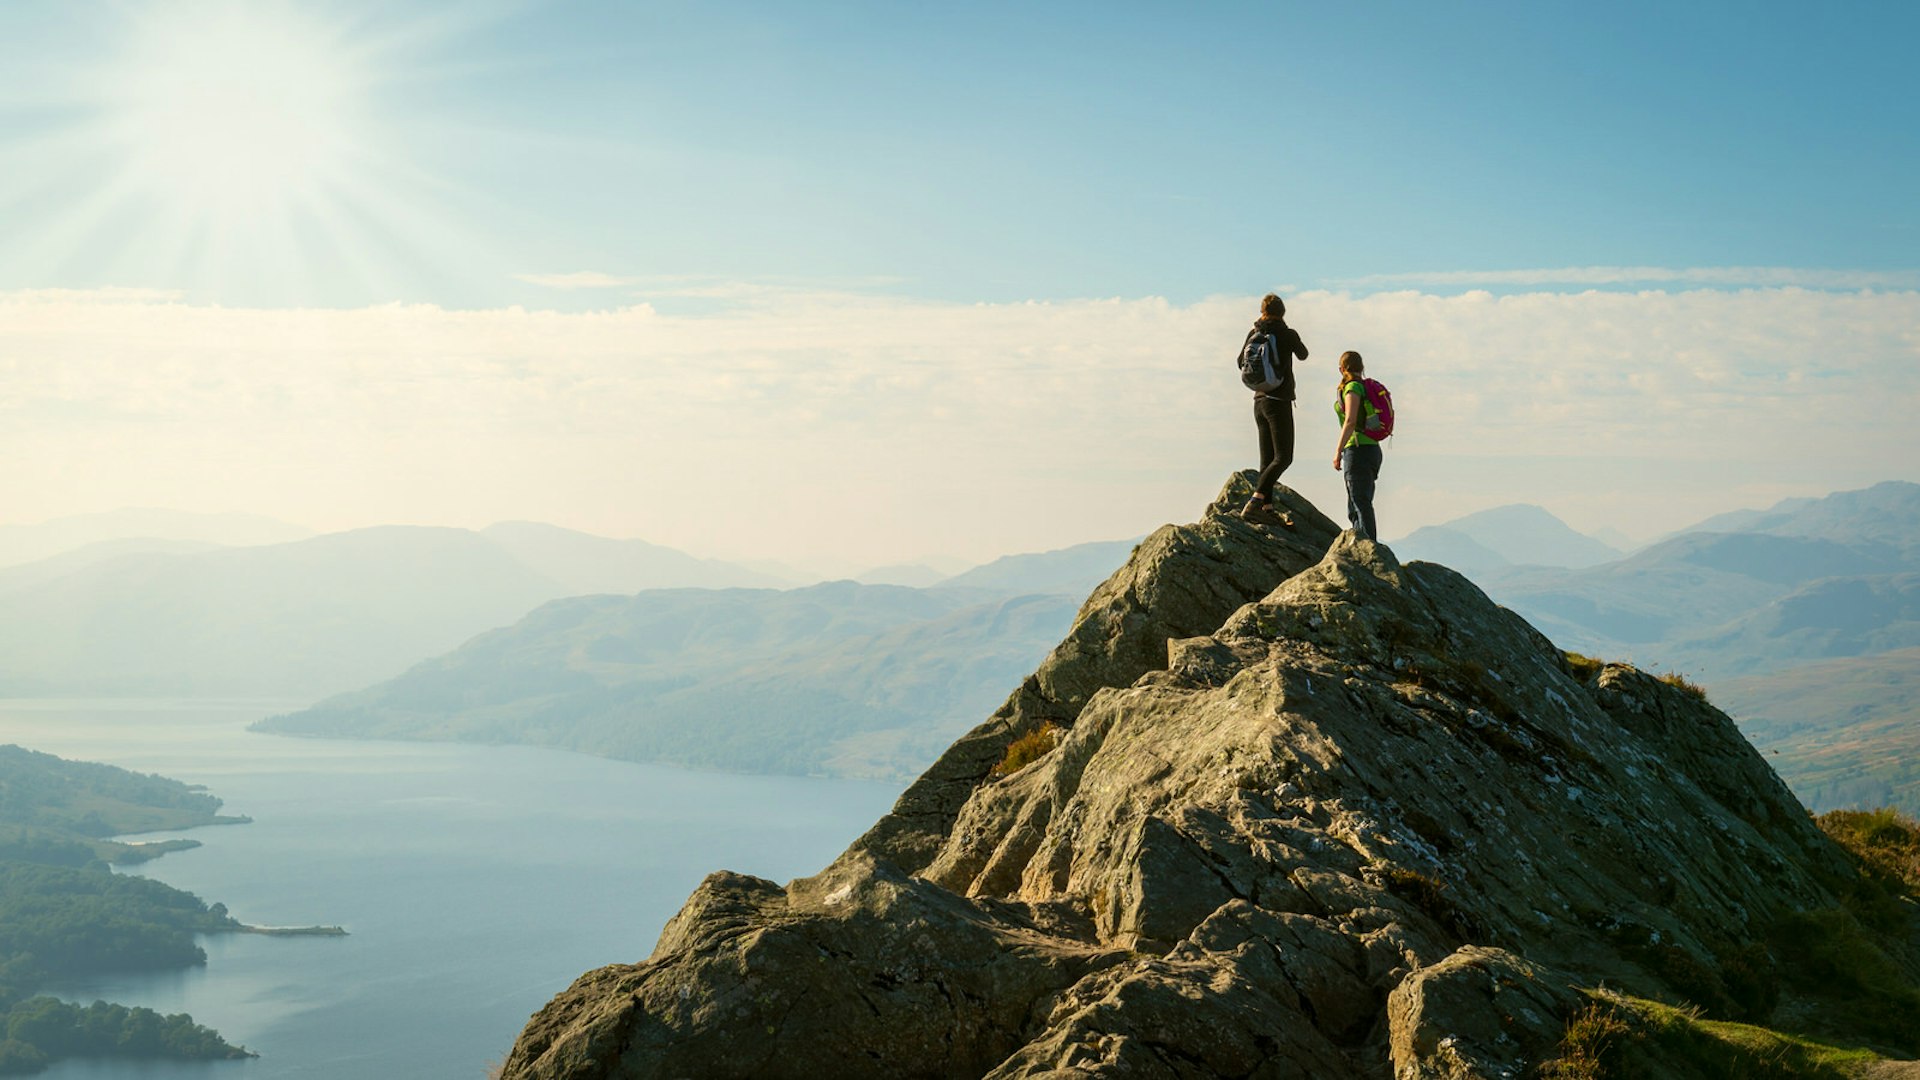 Two people stand on a rocky peak surrounded by more mountains and water; travel and grief